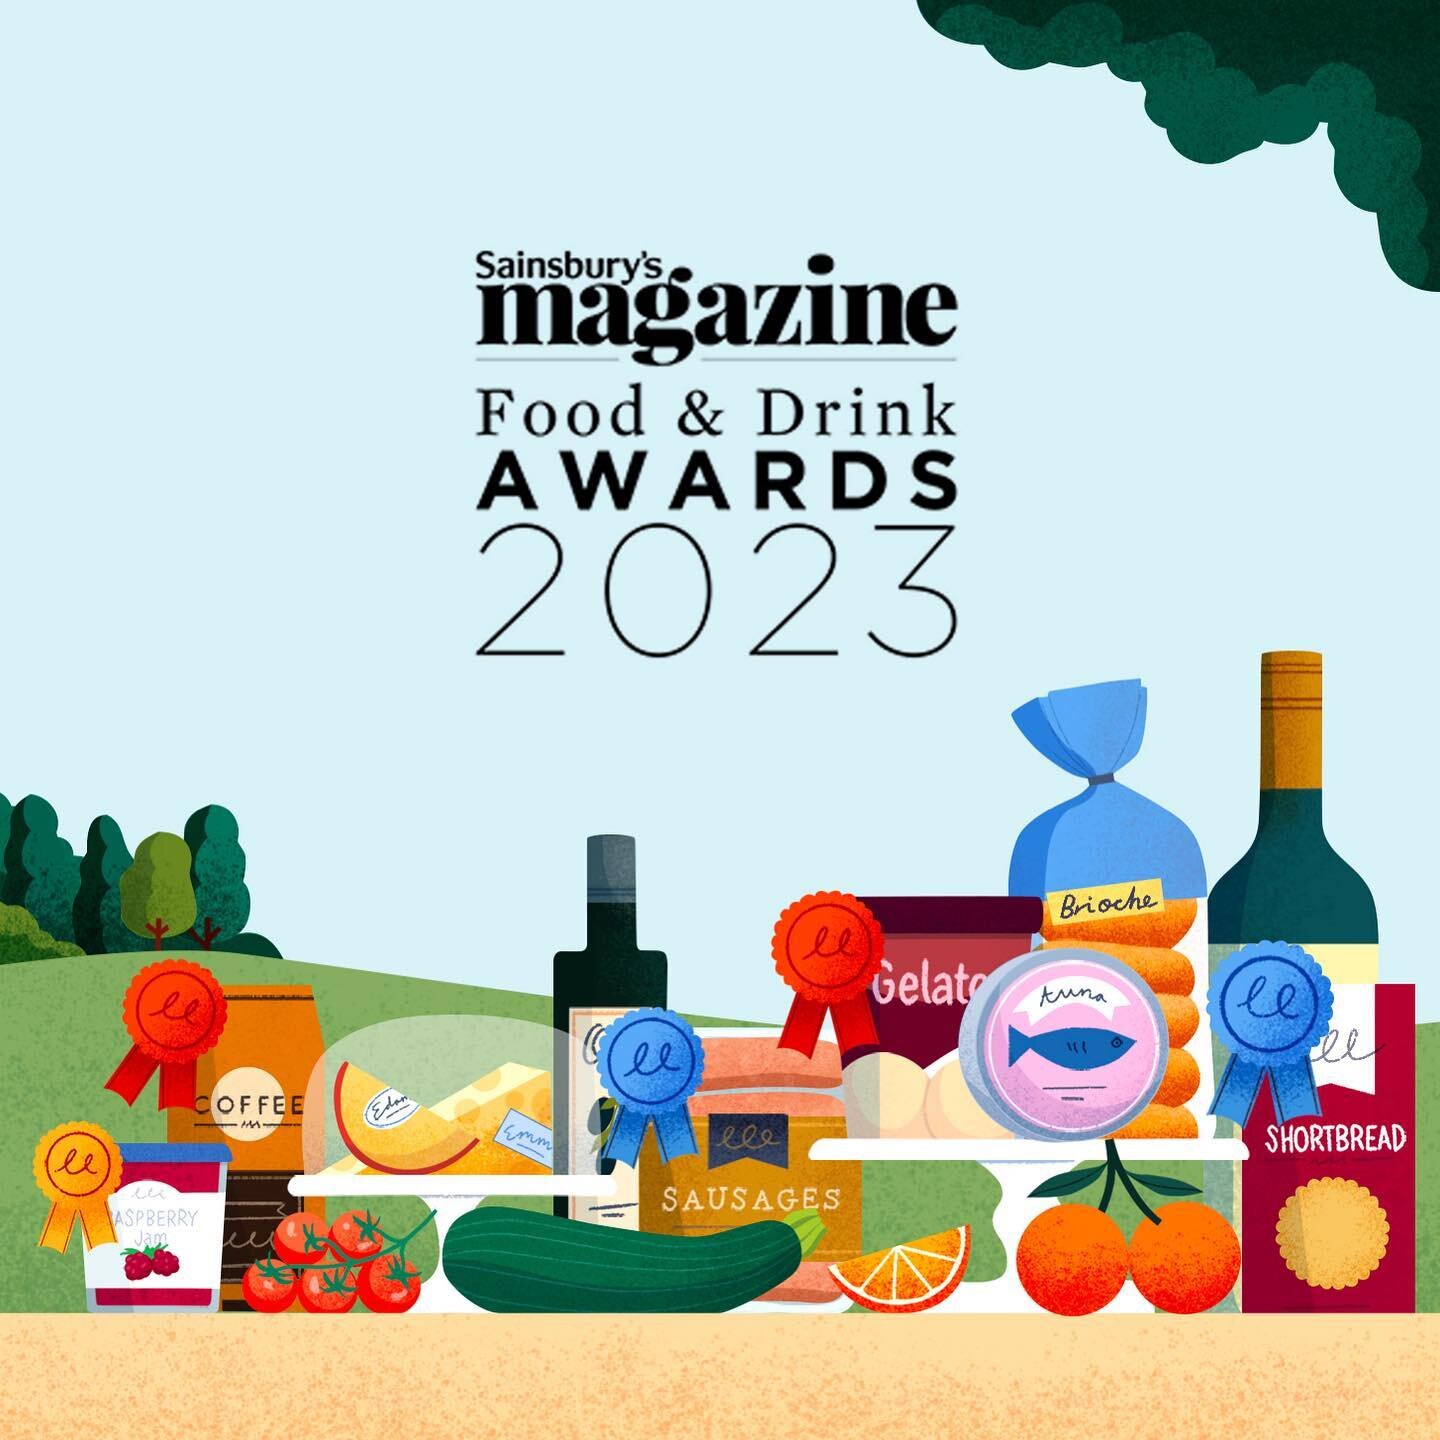 ⁣Hello! Here is a new-ish piece for @sainsburysmag. I illustrated some food for the 2023 food and drink awards. ⠀
.⠀
.⠀
.⠀
.⠀
#food #illustration #foodillustration #sainsburiesmag